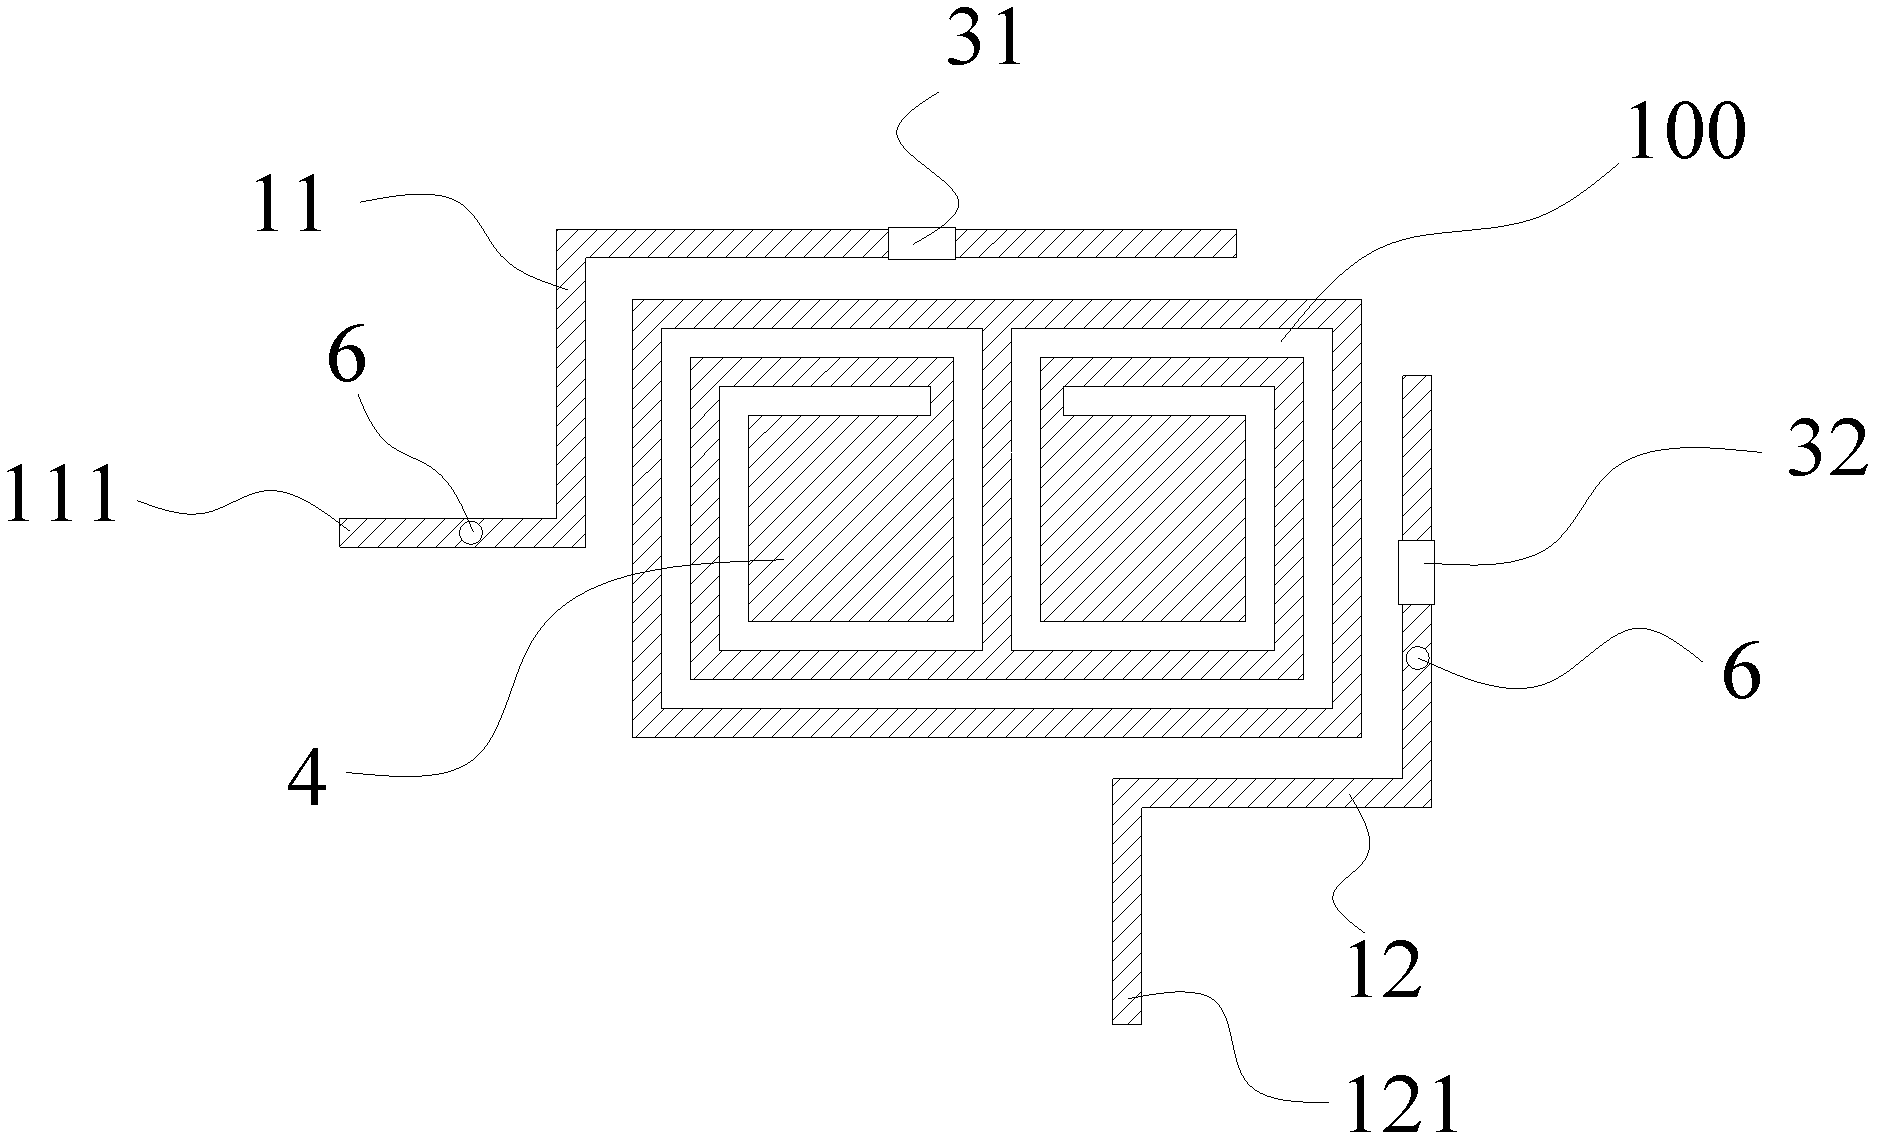 Dual-polarized antenna and MIMO (multiple input multiple output) antenna with same